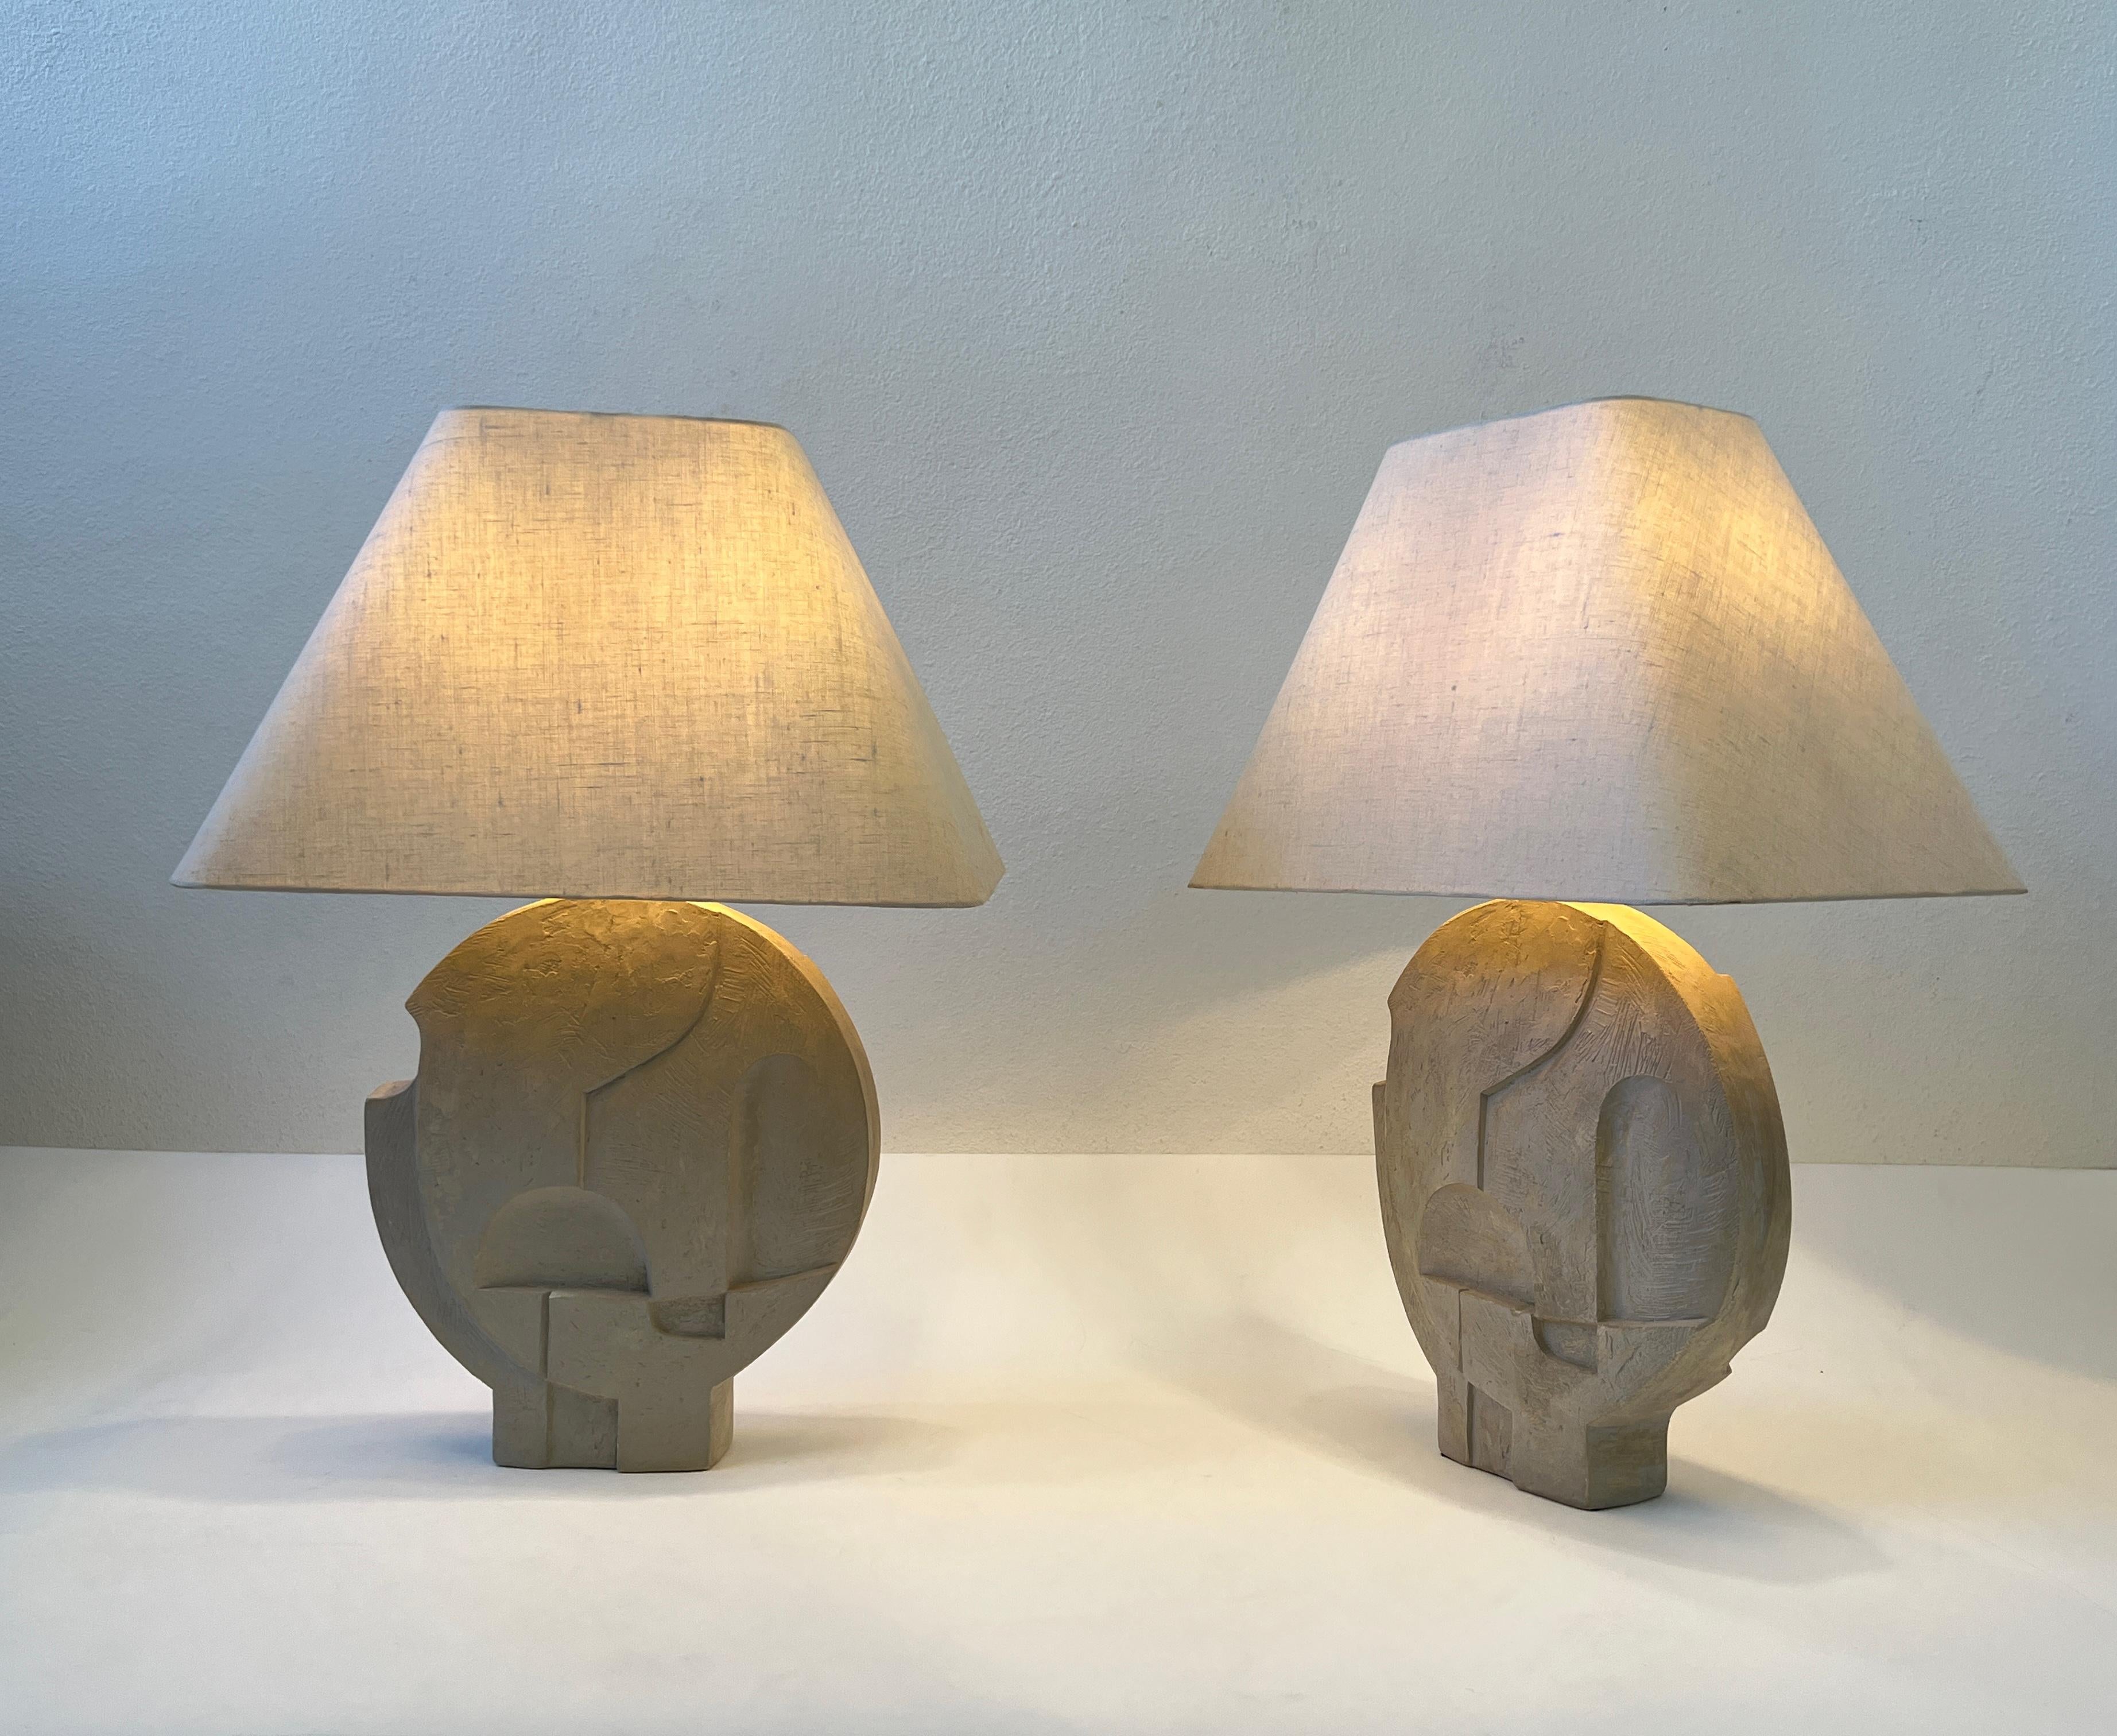 Glamorous pair of geometric brutalist cast plaster table Lamps by Casual lamps of California.
This came out of a Steve Chase Designed estate in Rancho Mirage CA. 
Newly rewired with new polish brass hardware, the shades are original they show